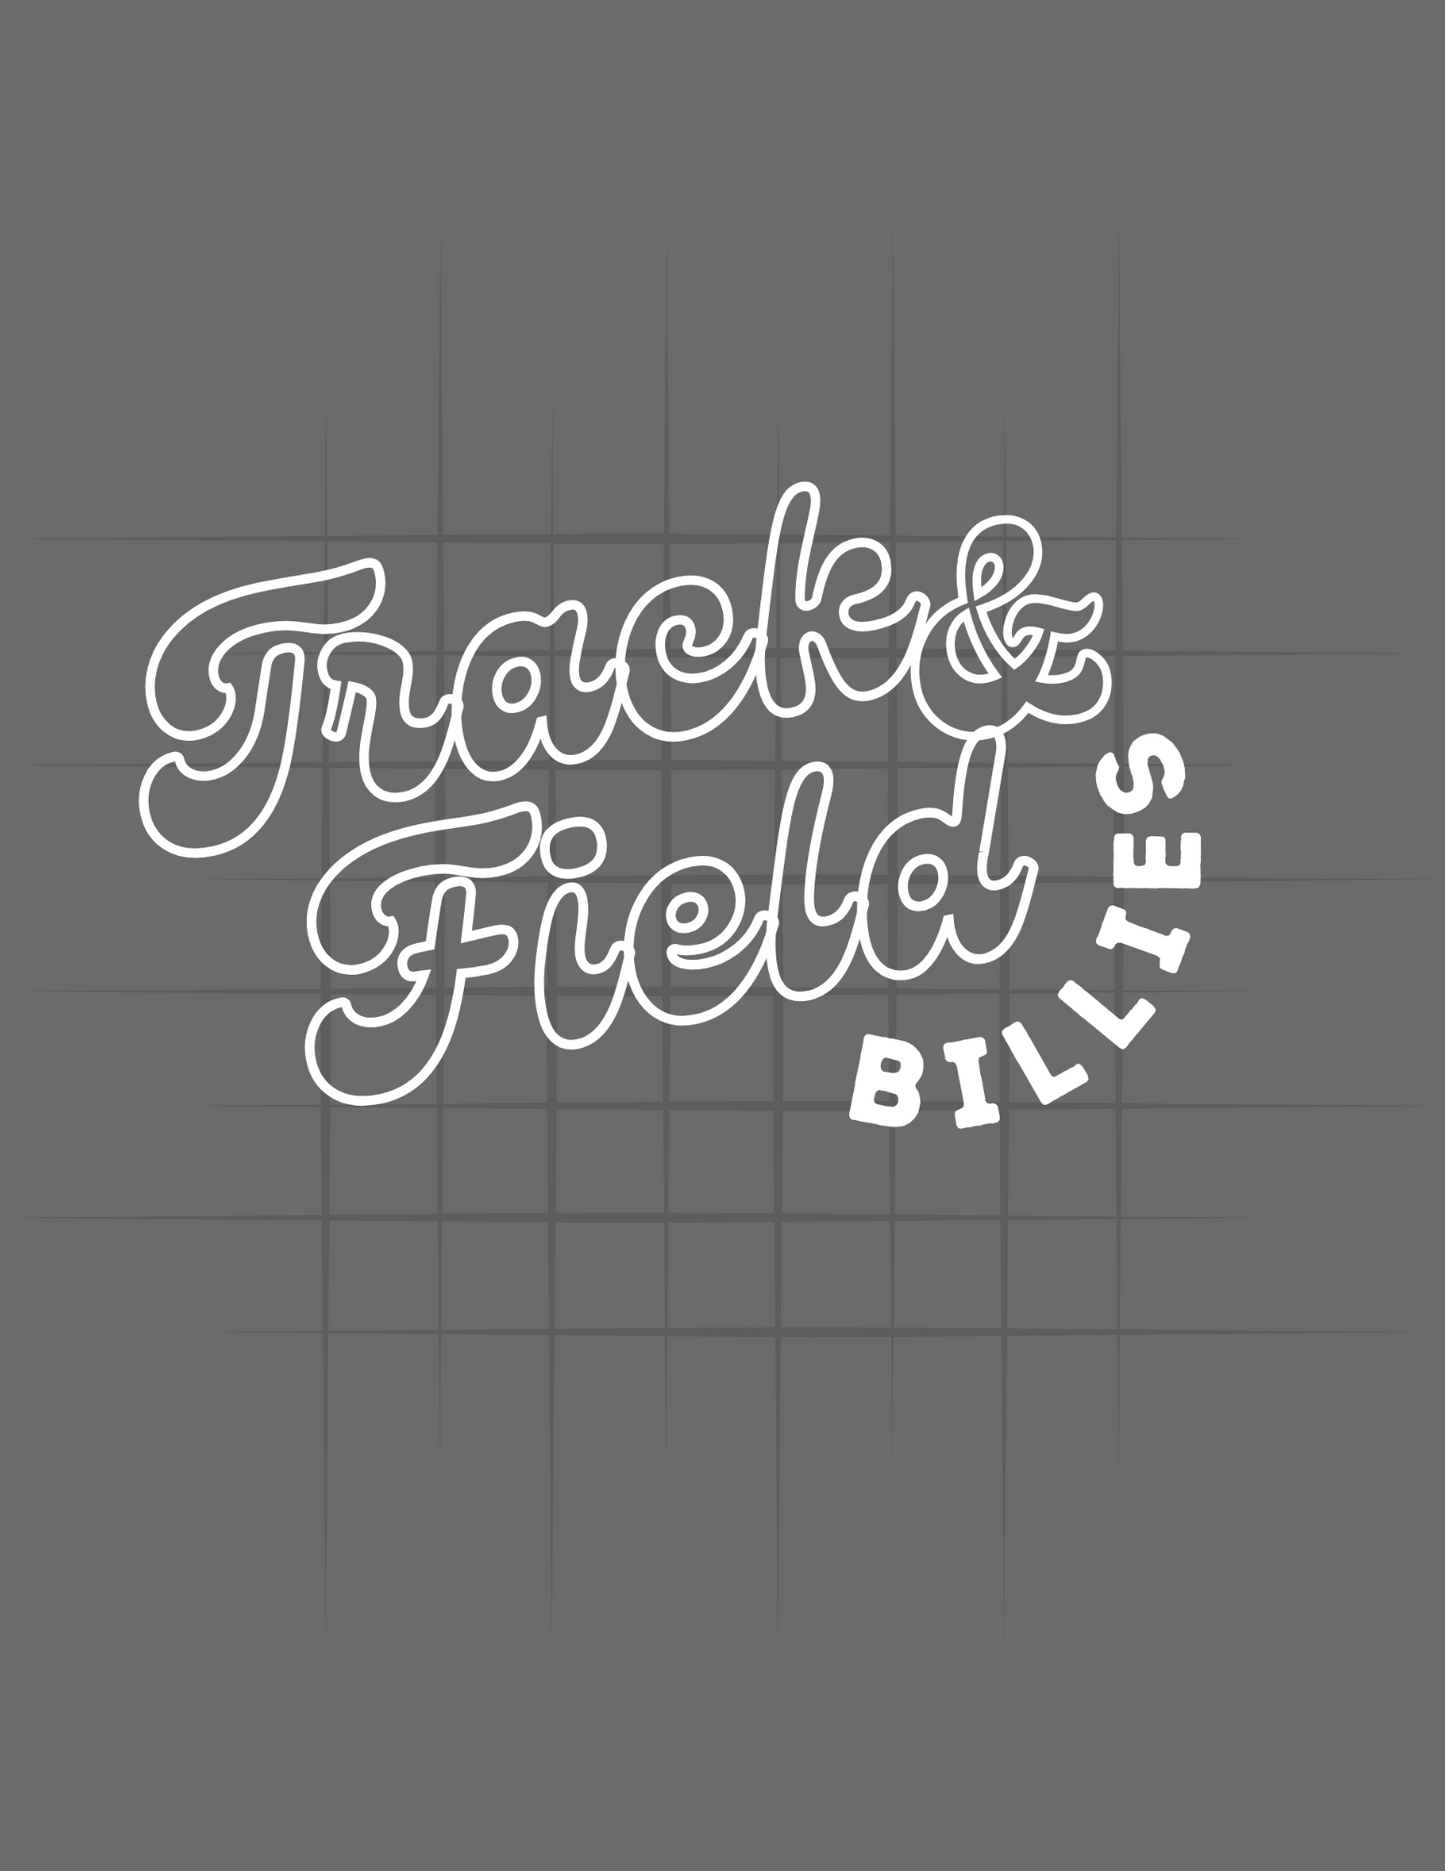 Billies Outlined Track and Field Tee